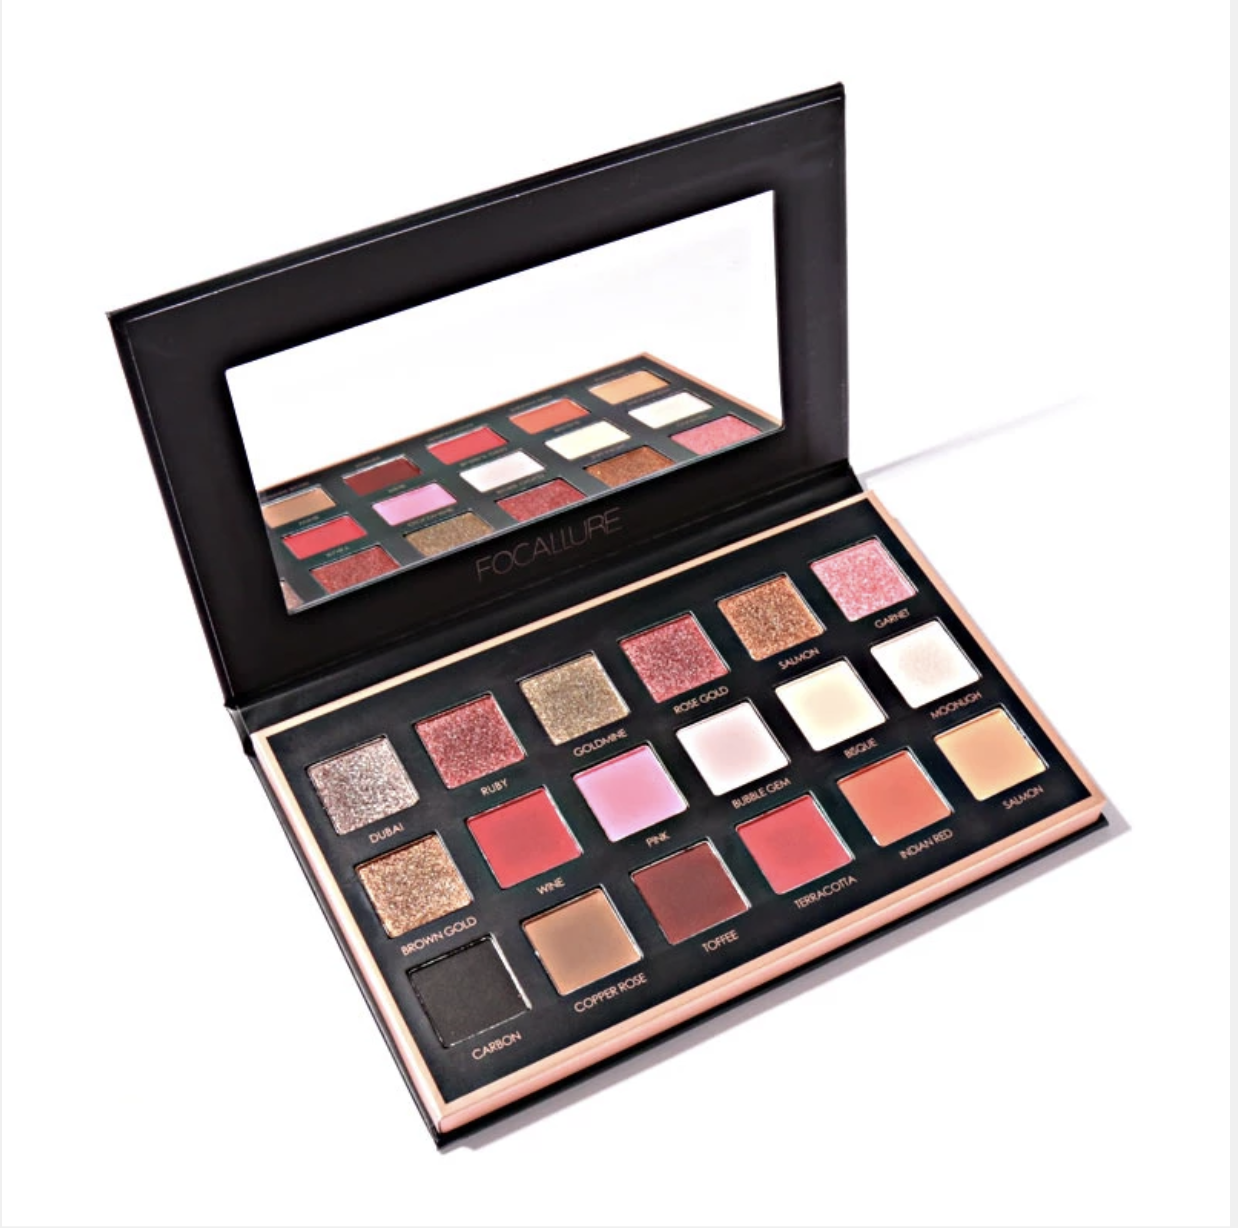 Bảng Phấn Mắt 18 Màu Focallure We Care Your Favors 18 Shades Full Function Palette With Mirror (FA40) _ Focallure Chính Hãng